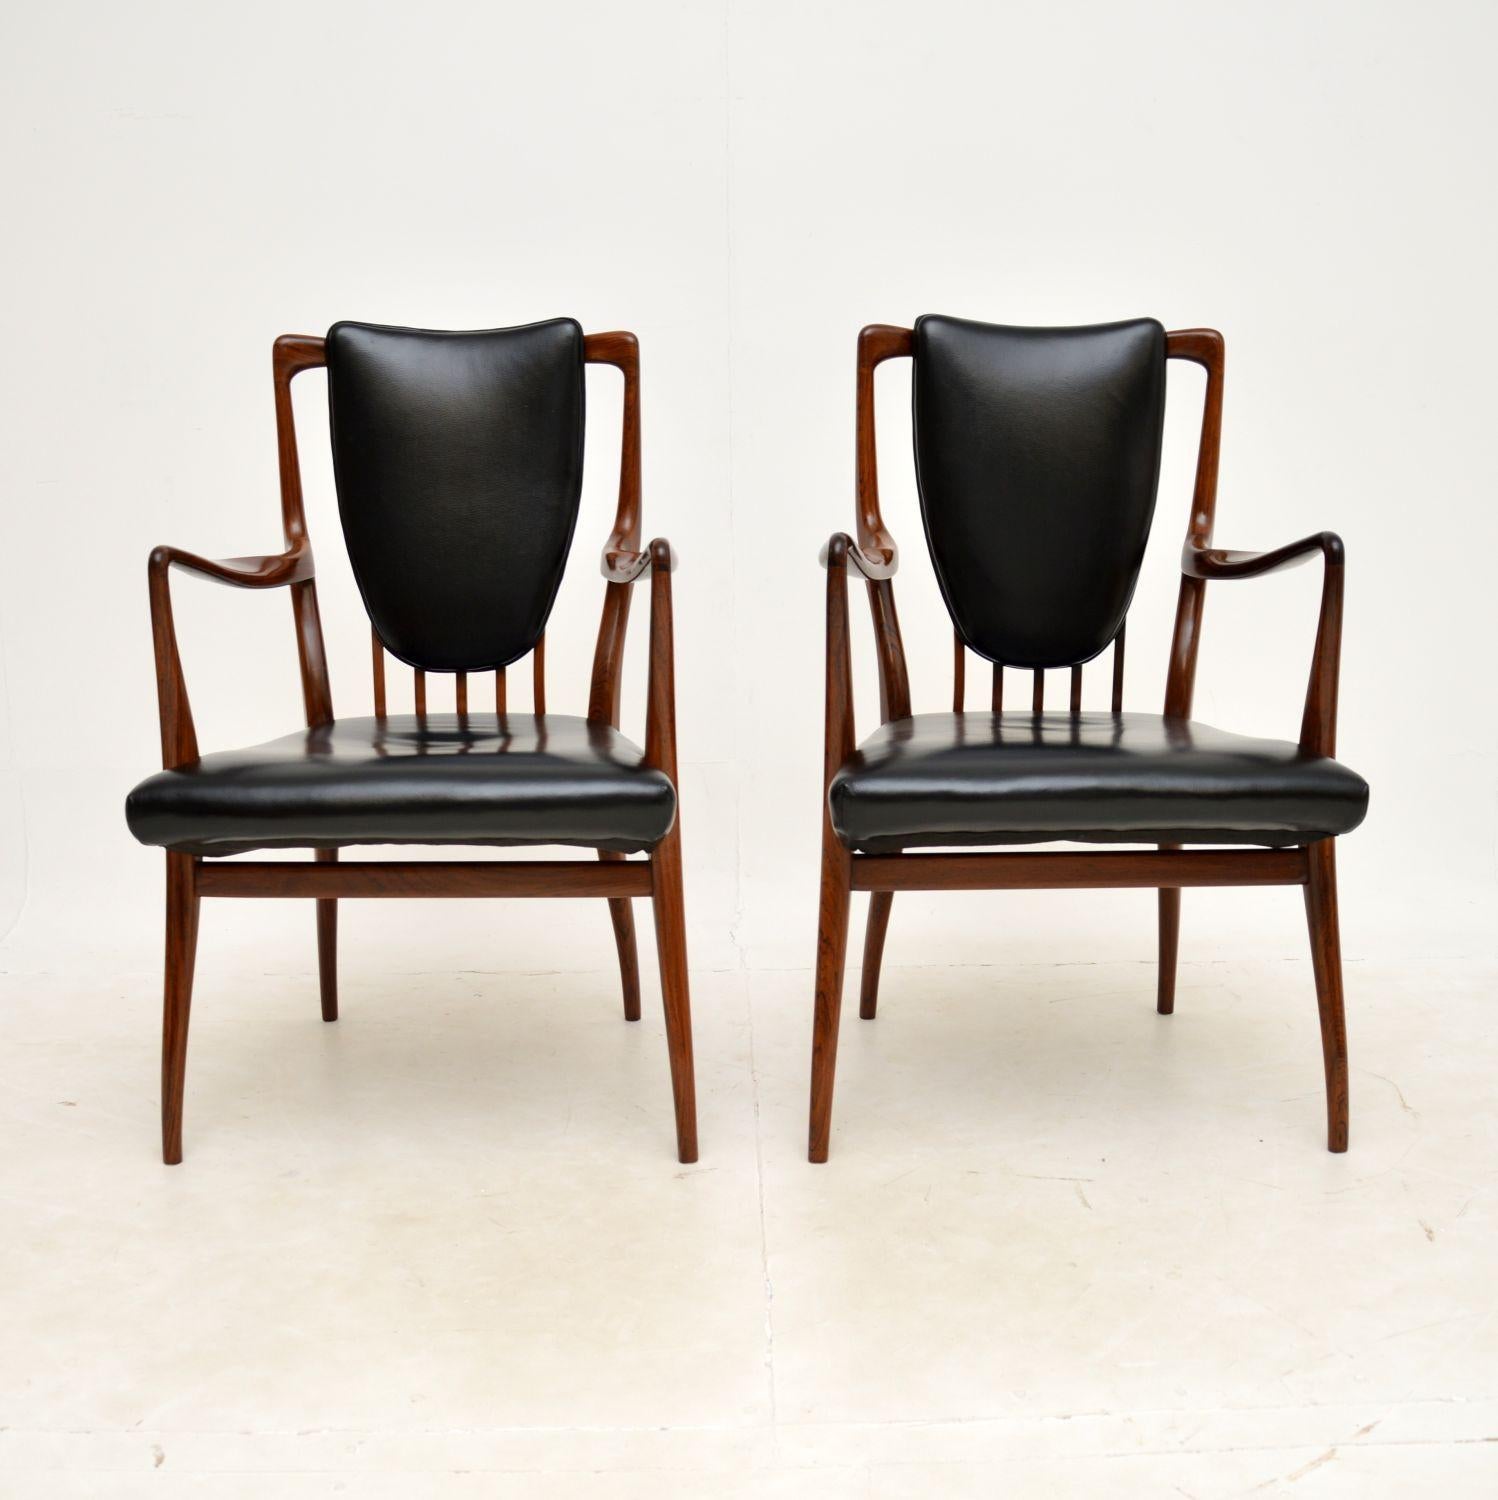 An absolutely stunning and very rare pair of carver chairs by Andrew Milne. They were designed in the 1940’s for Heal’s, this pair dates from the 1950’s.

They have a spectacular design, and look beautiful from every angle. The quality is amazing,